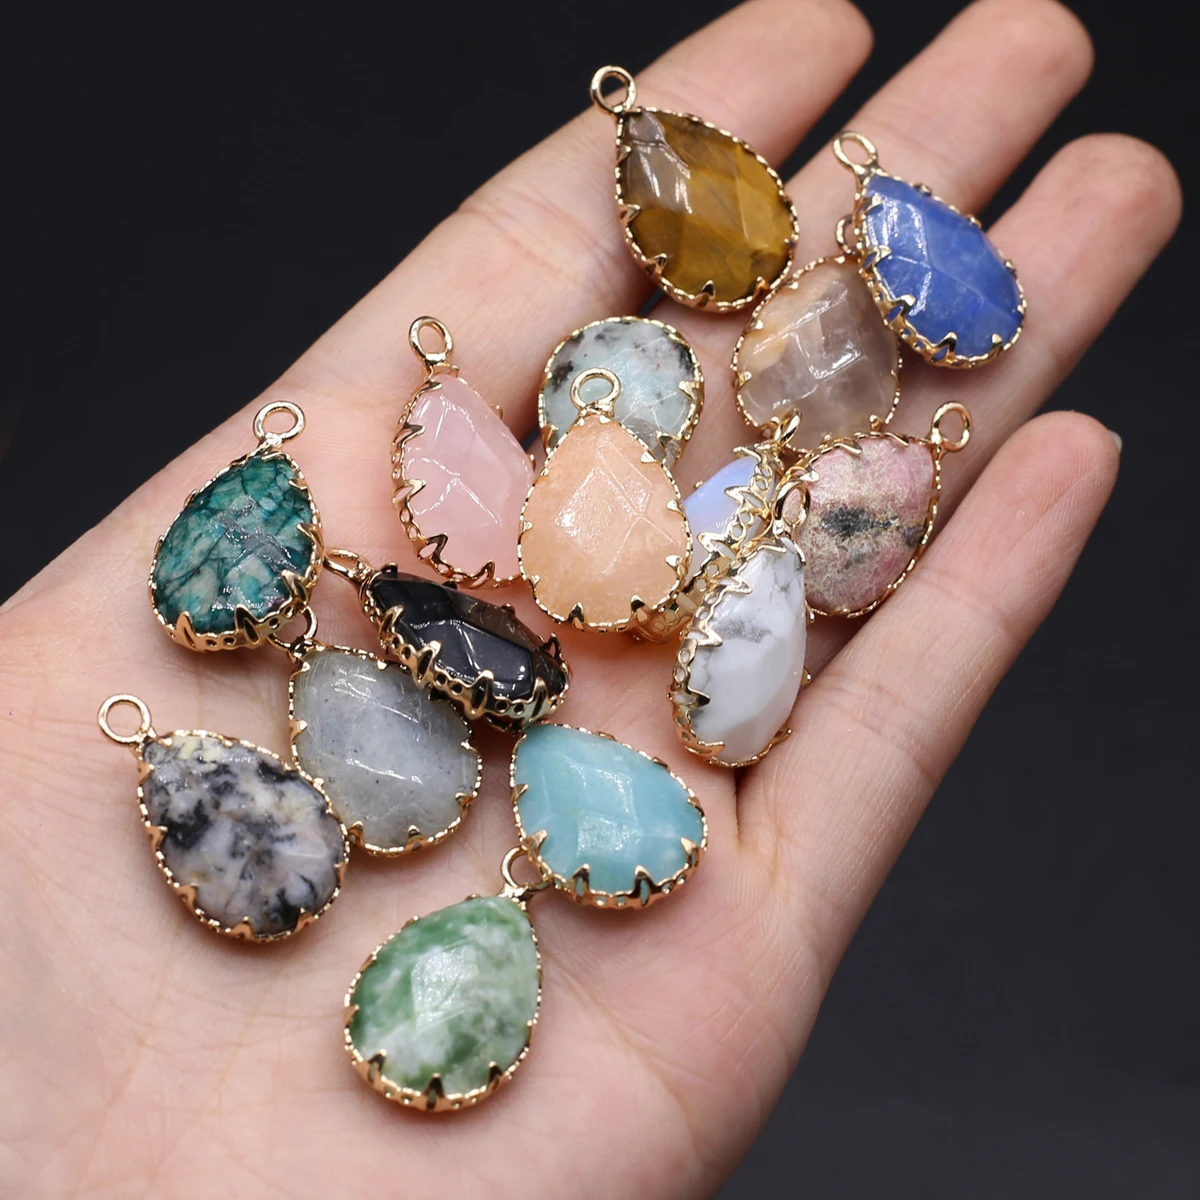 

5pc Natural Stone Pendant Water Drop Quartz Amazonite Gold Edging Healing Crystals Stone Charms For Jewelry Making DIY Necklace